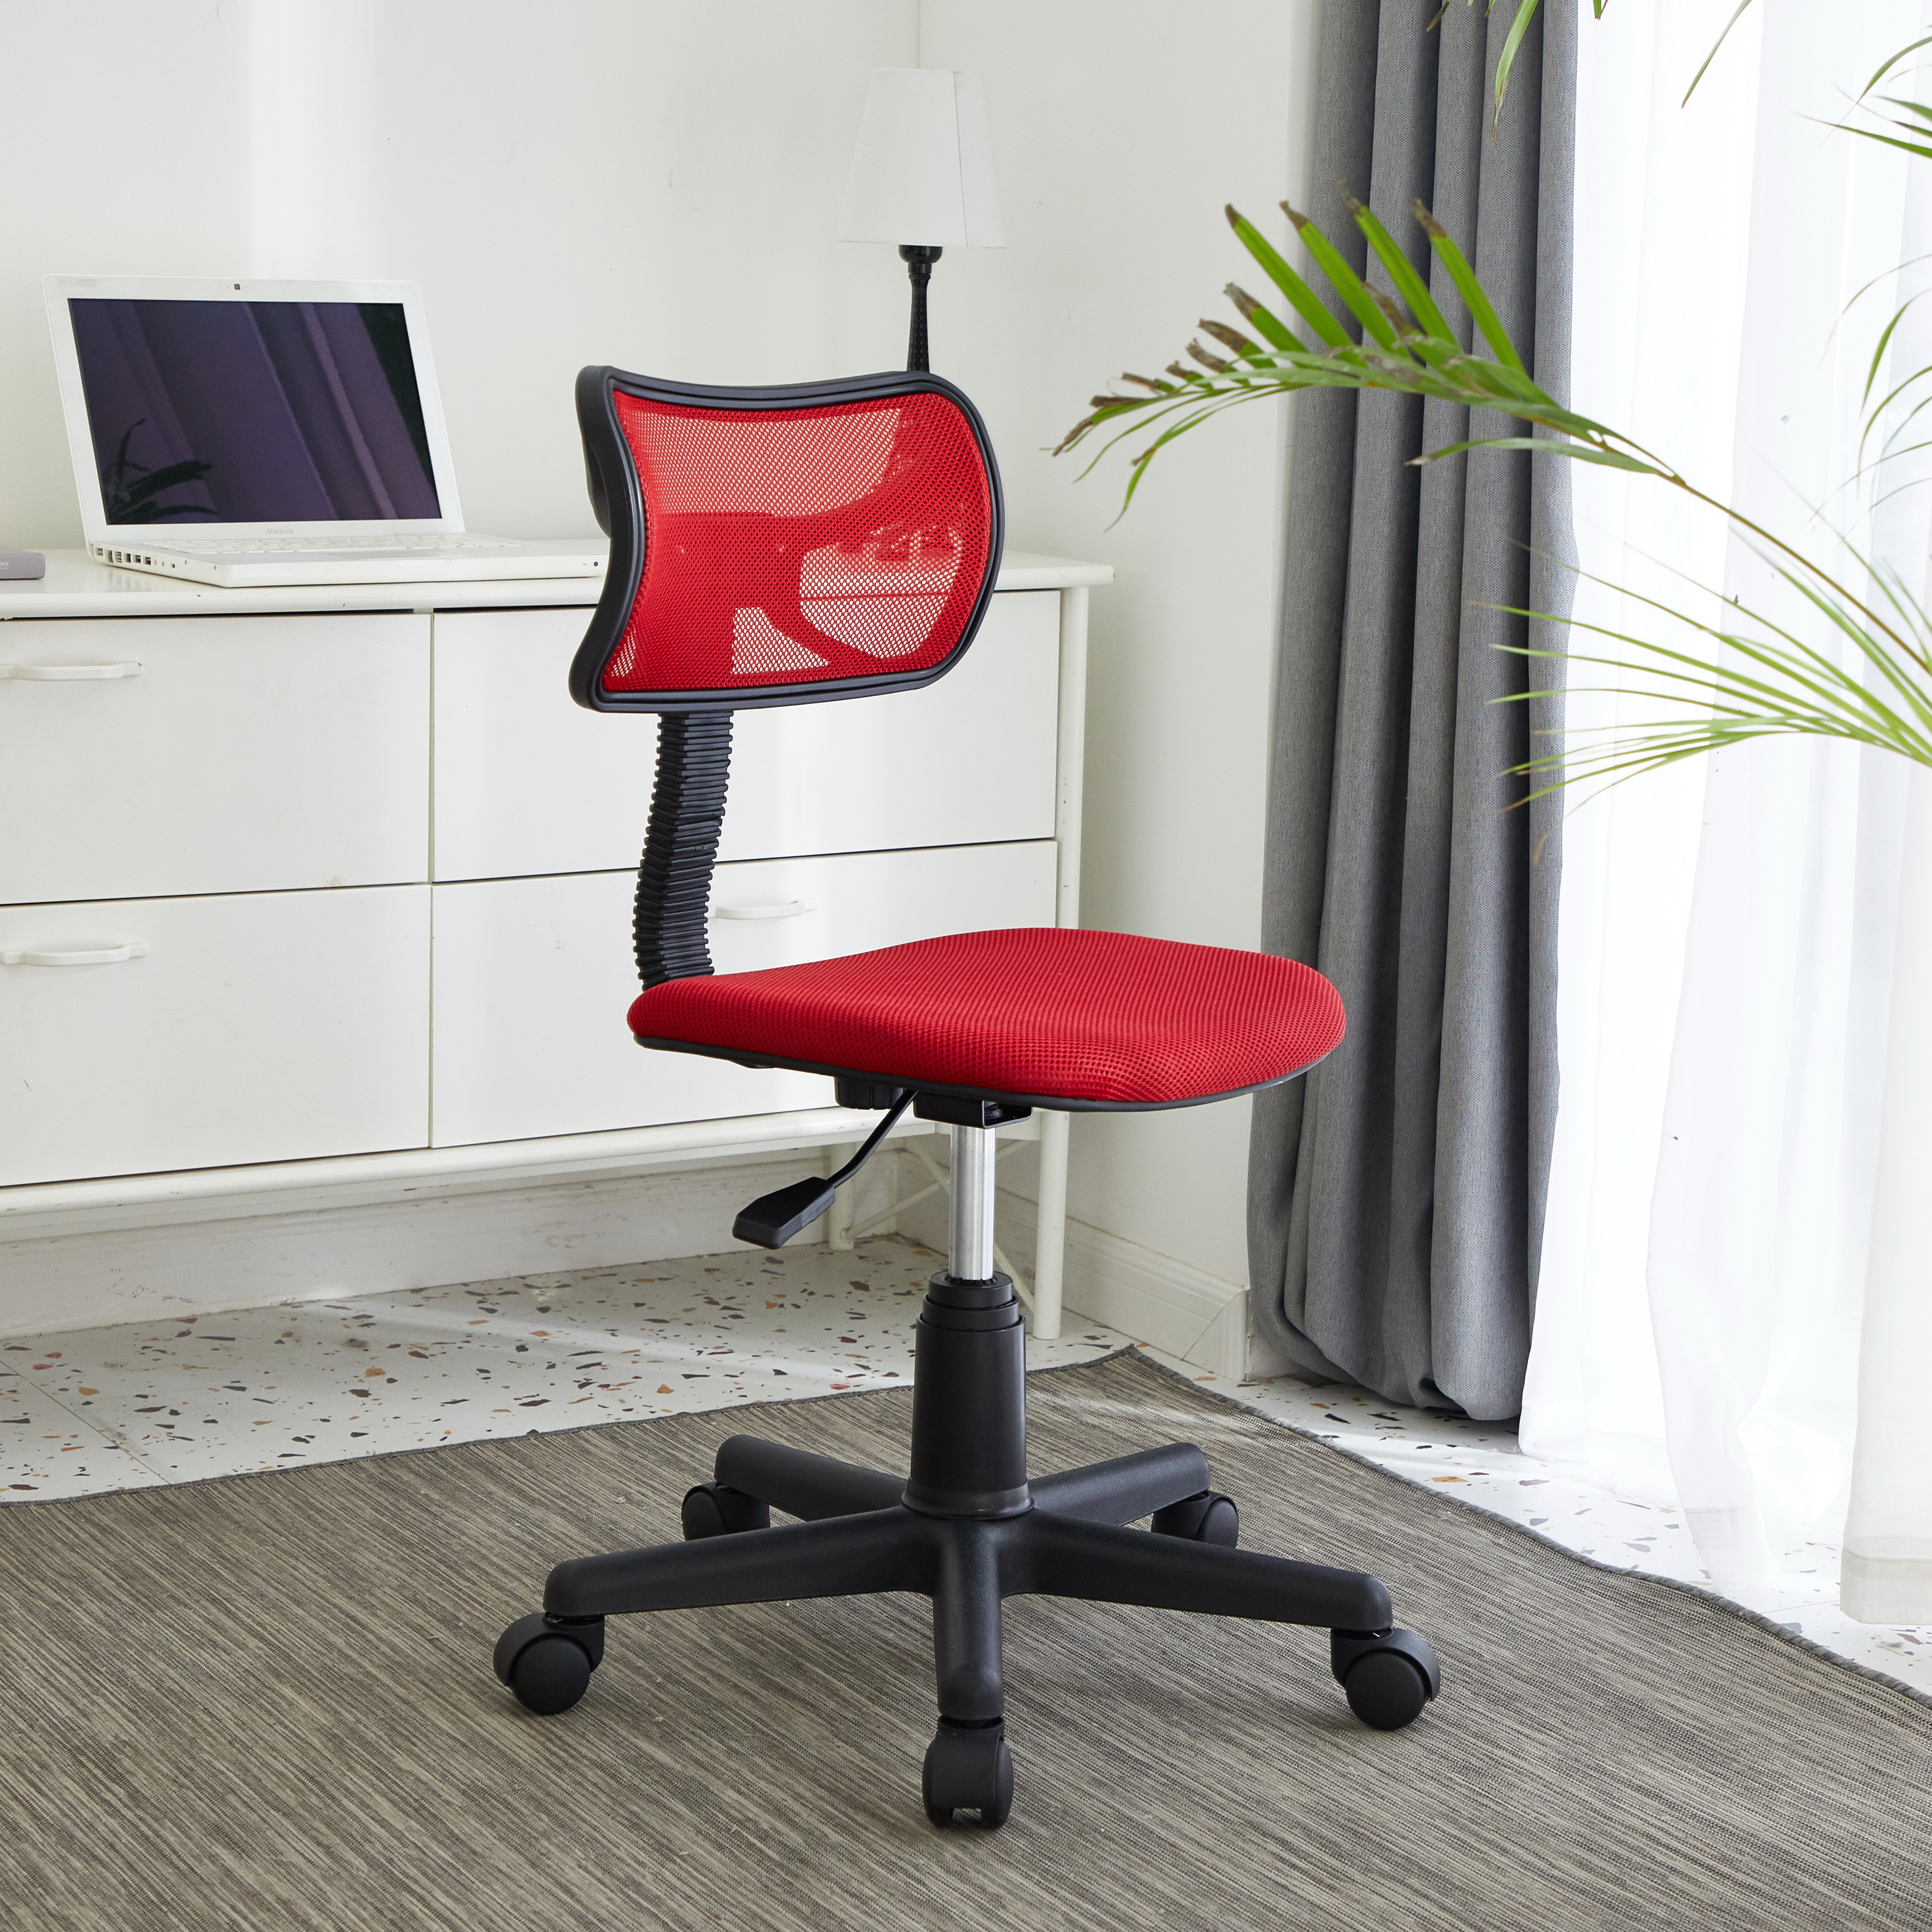 Urban Shop Task Chair with Adjustable Height & Swivel, 225 lb. Capacity, Multiple Colors - image 1 of 10